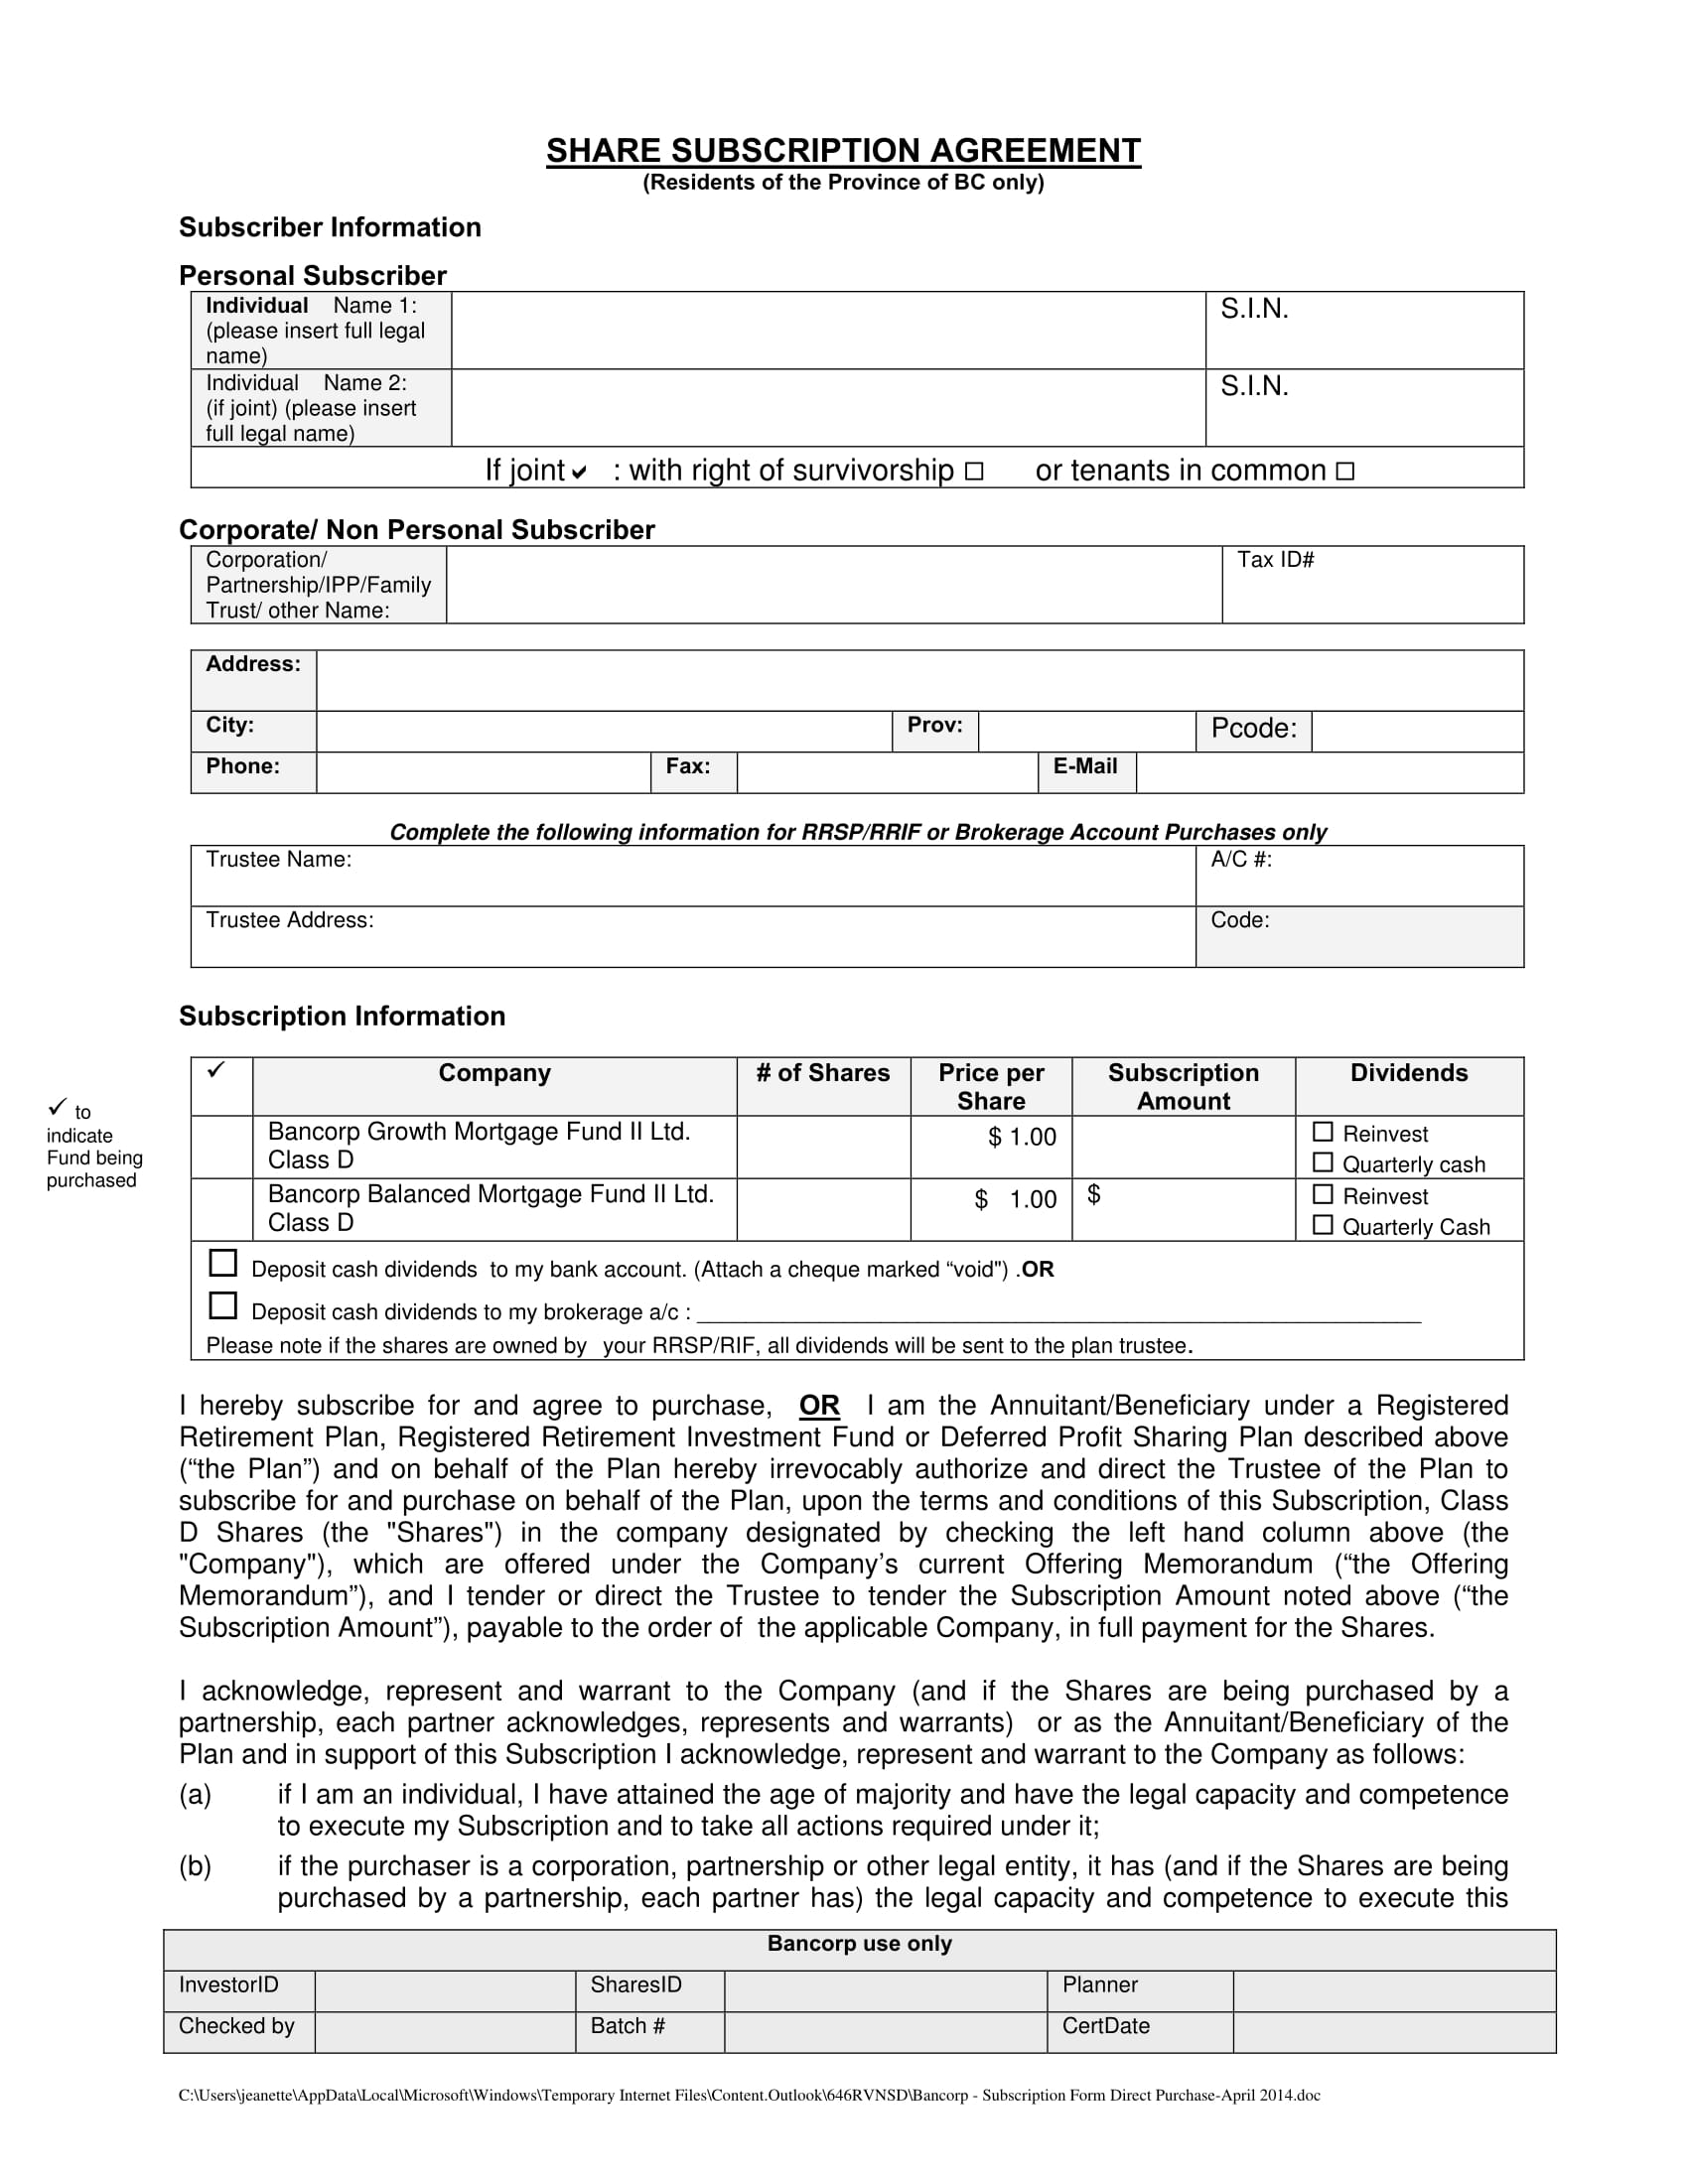 blank share subscription agreement form 1